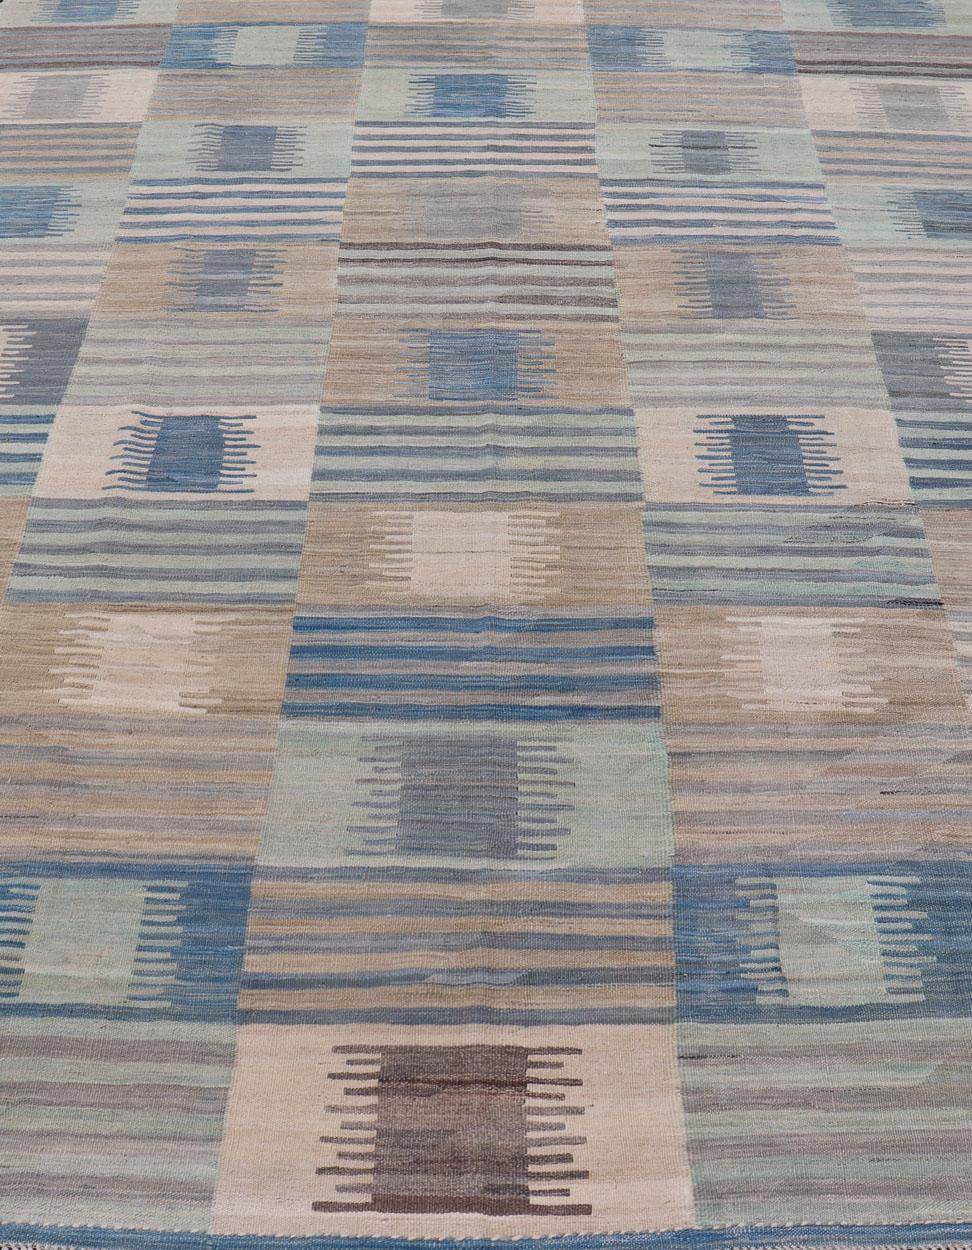 Contemporary Flat-Weave Afghan Kilim Rug with Modern Design in Blues, Taupe, and Cream For Sale